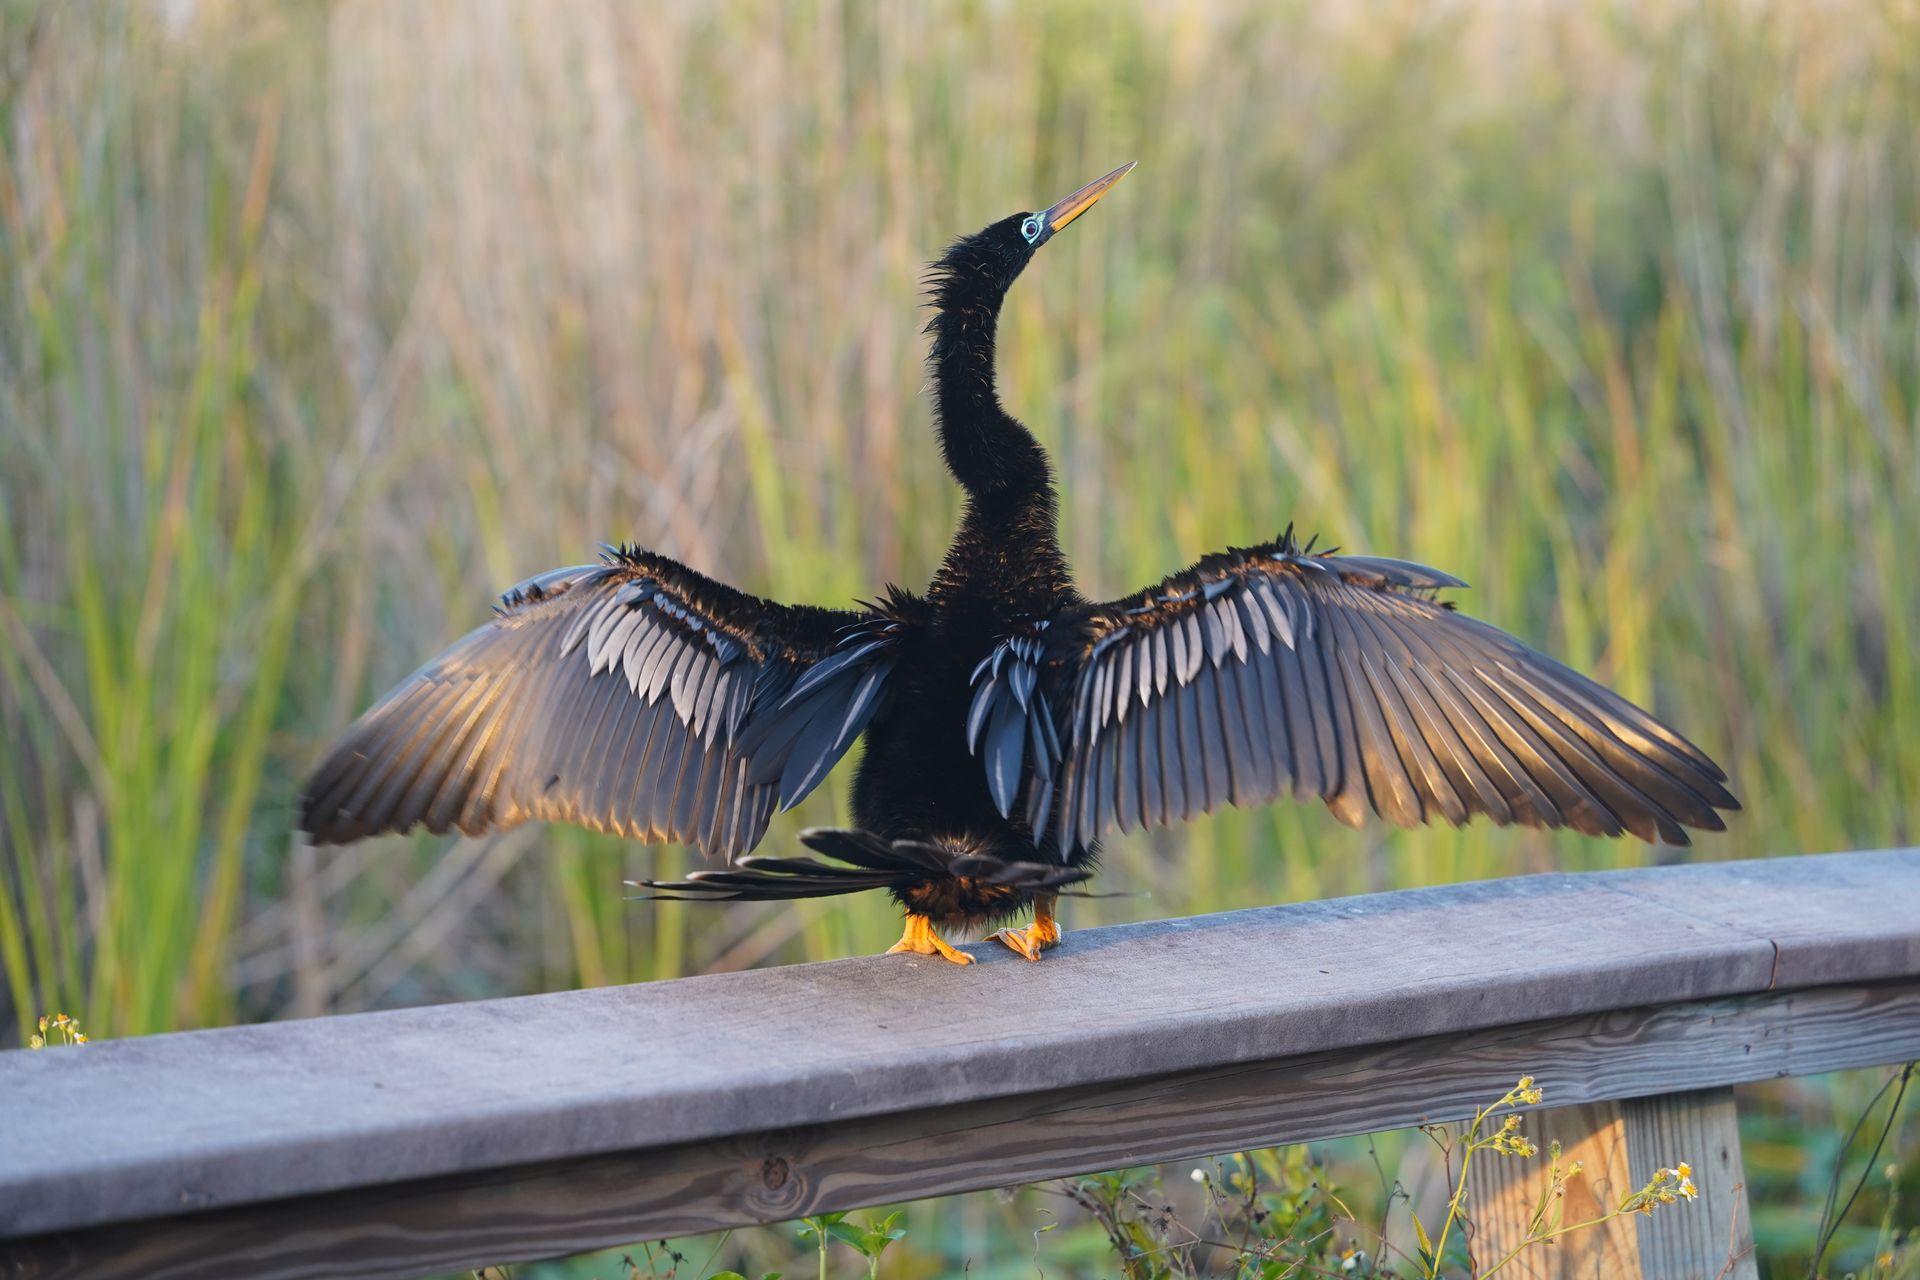 The back of an anhinga bird with its' wings spread wide on the Anghinga trail